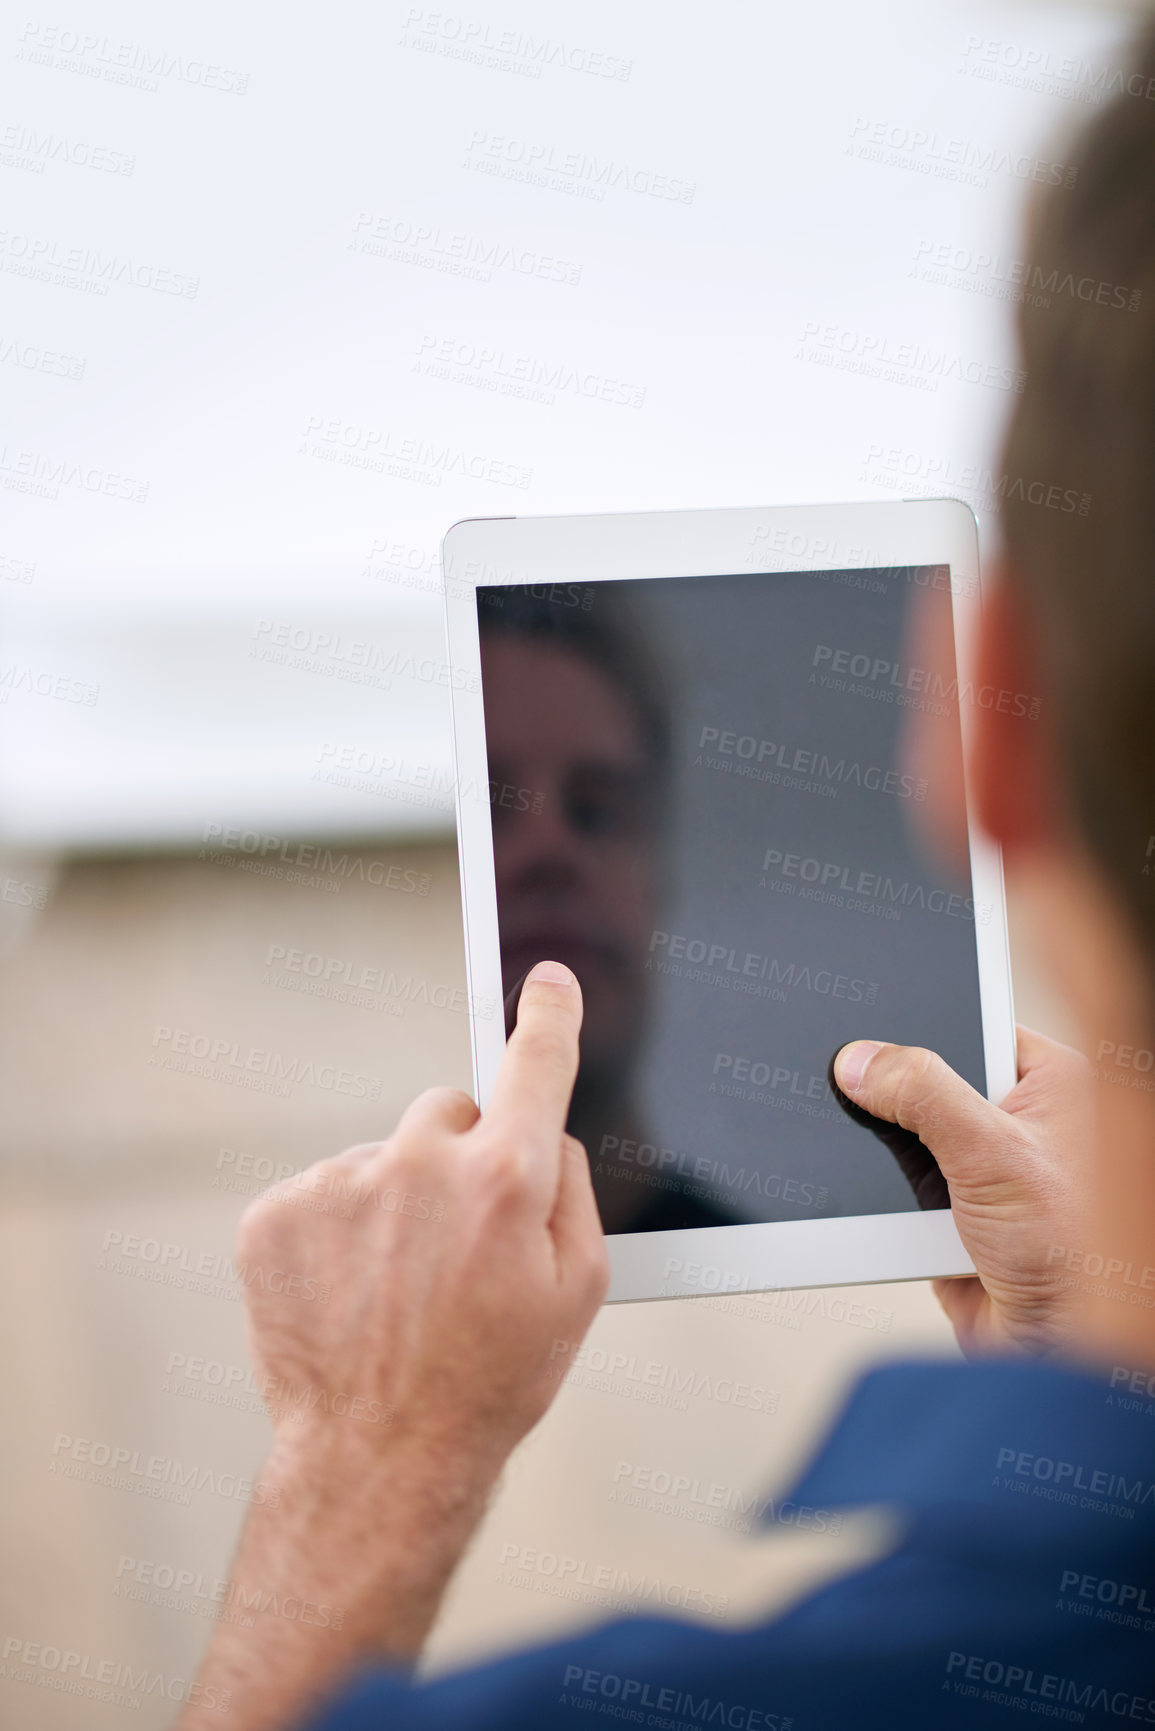 Buy stock photo Over the shoulder shot of a man using a digital tablet